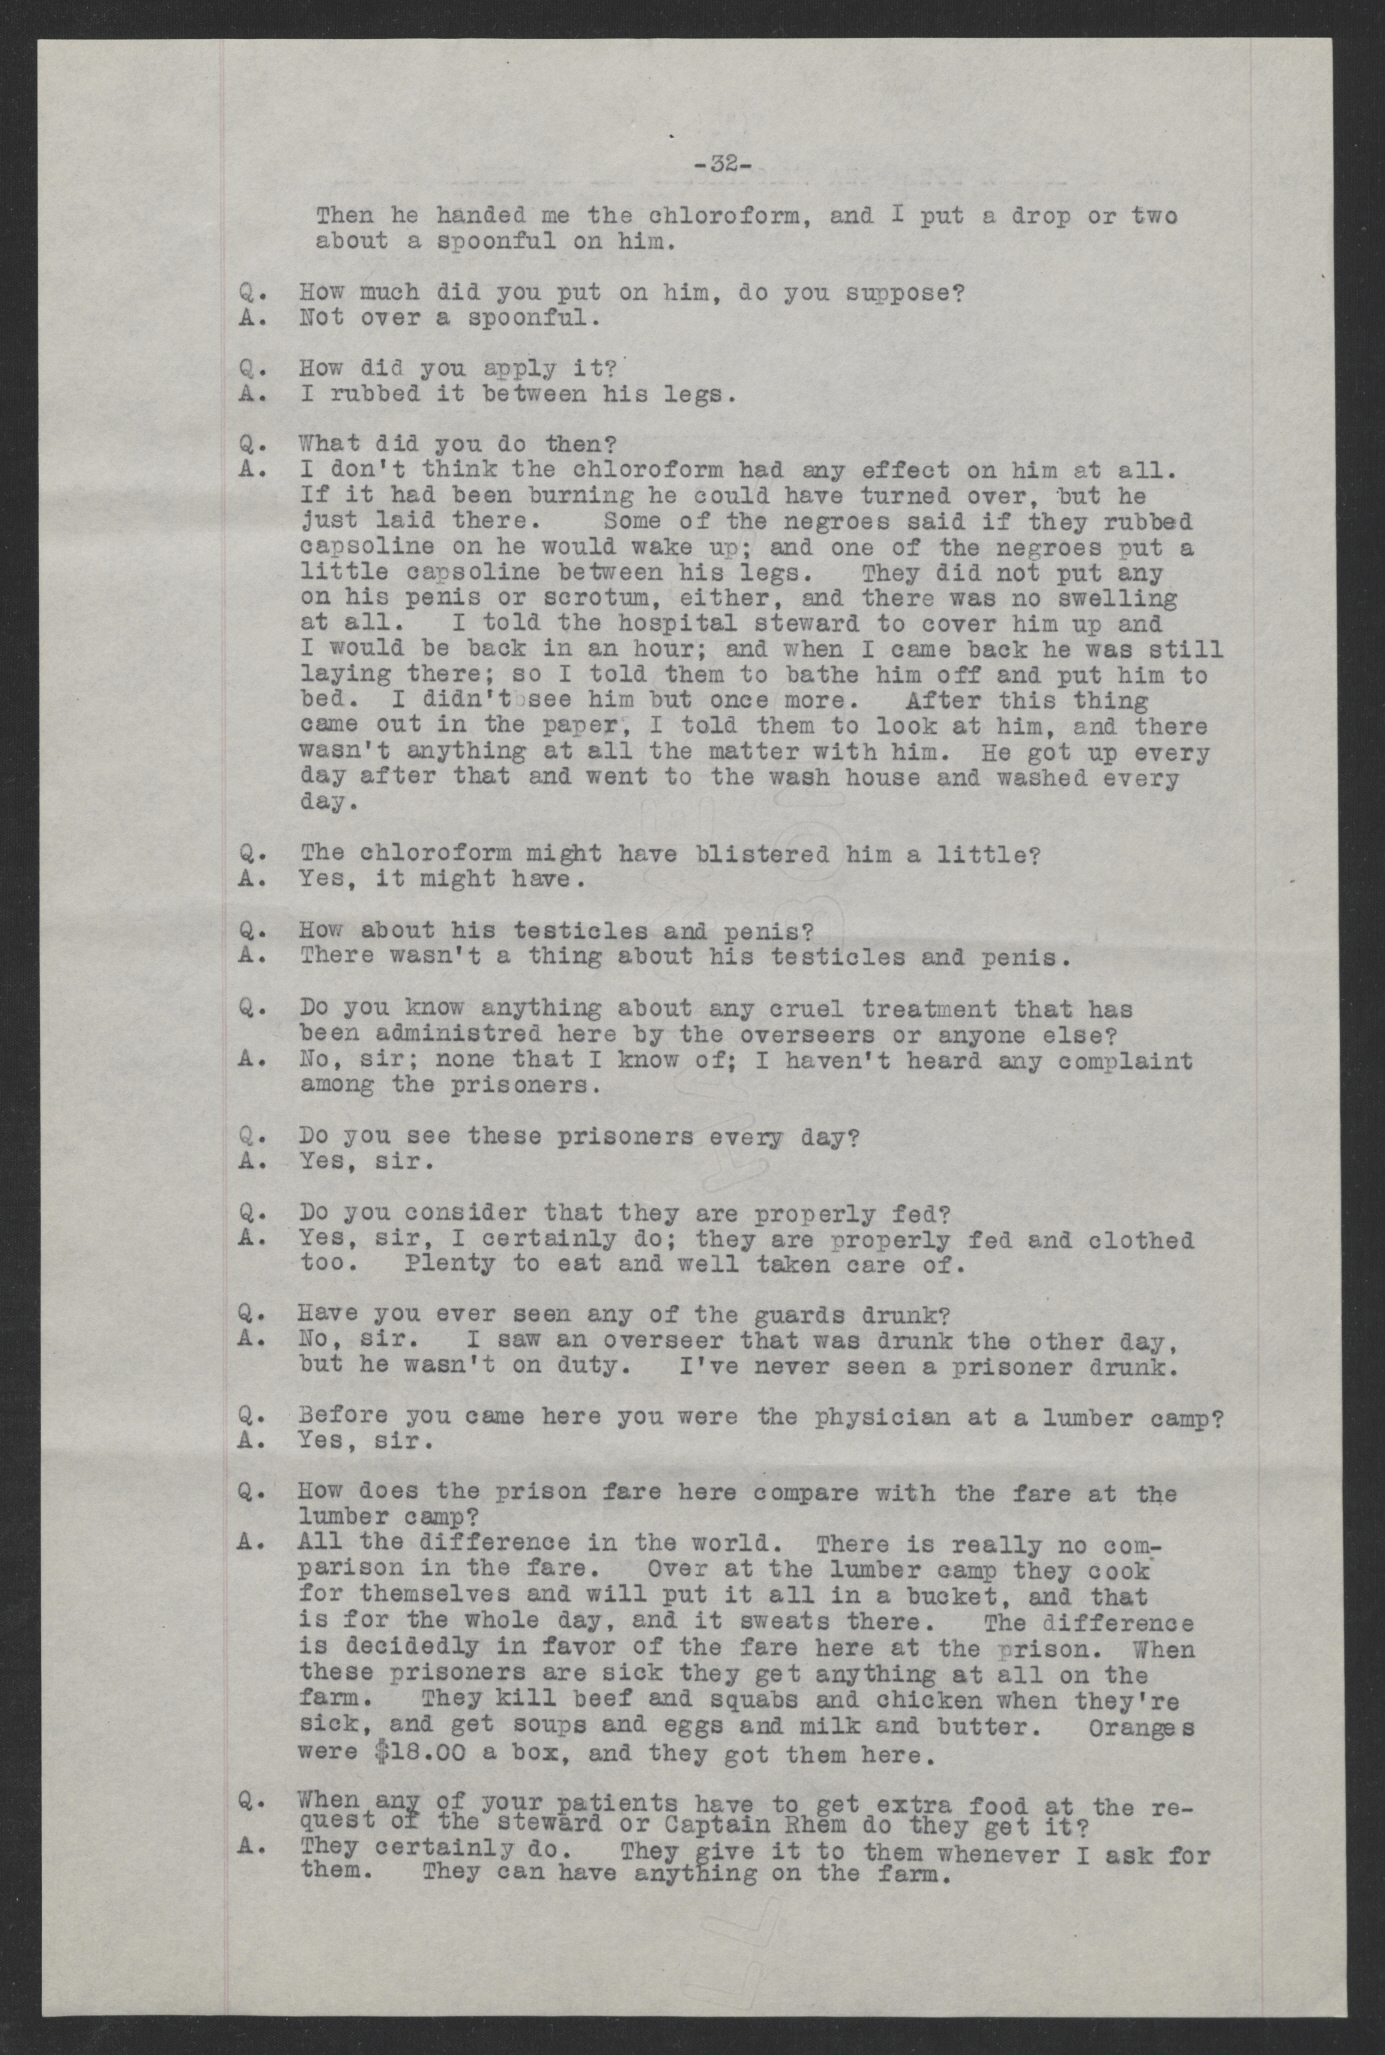 Investigation of the Charges Made by Inmates of the State Prison Farm to Earl E. Dudding, 12 May 1919, page 32